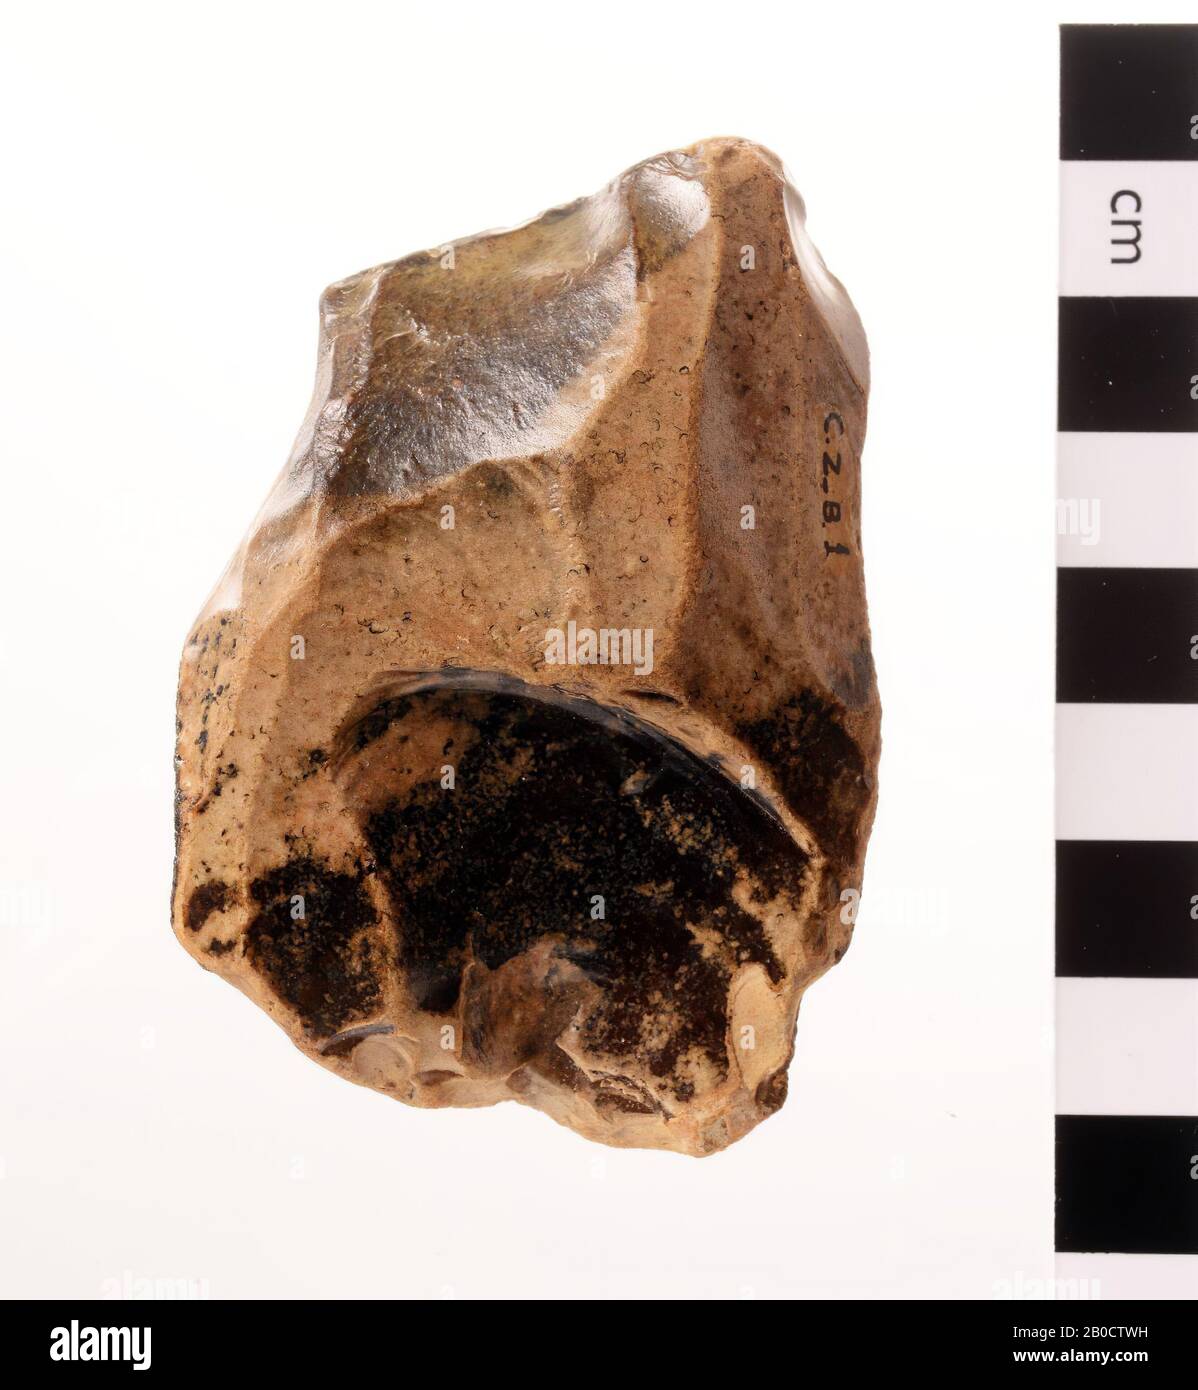 A slightly rolled and heavily patinated Levallois core, more or less rectangular in shape and with two processing platforms. A significant exit negative has caused the core to become unusable. The core is marked in the previous collection with CZB1, Levallois core, flint, 7.3 x 5.1 cm, thickness 2.1 cm, 85.3 g., Mid-paleolithic 240,000-120,000 BC, Netherlands, Zeeland, Sluis, Cadzand Stock Photo